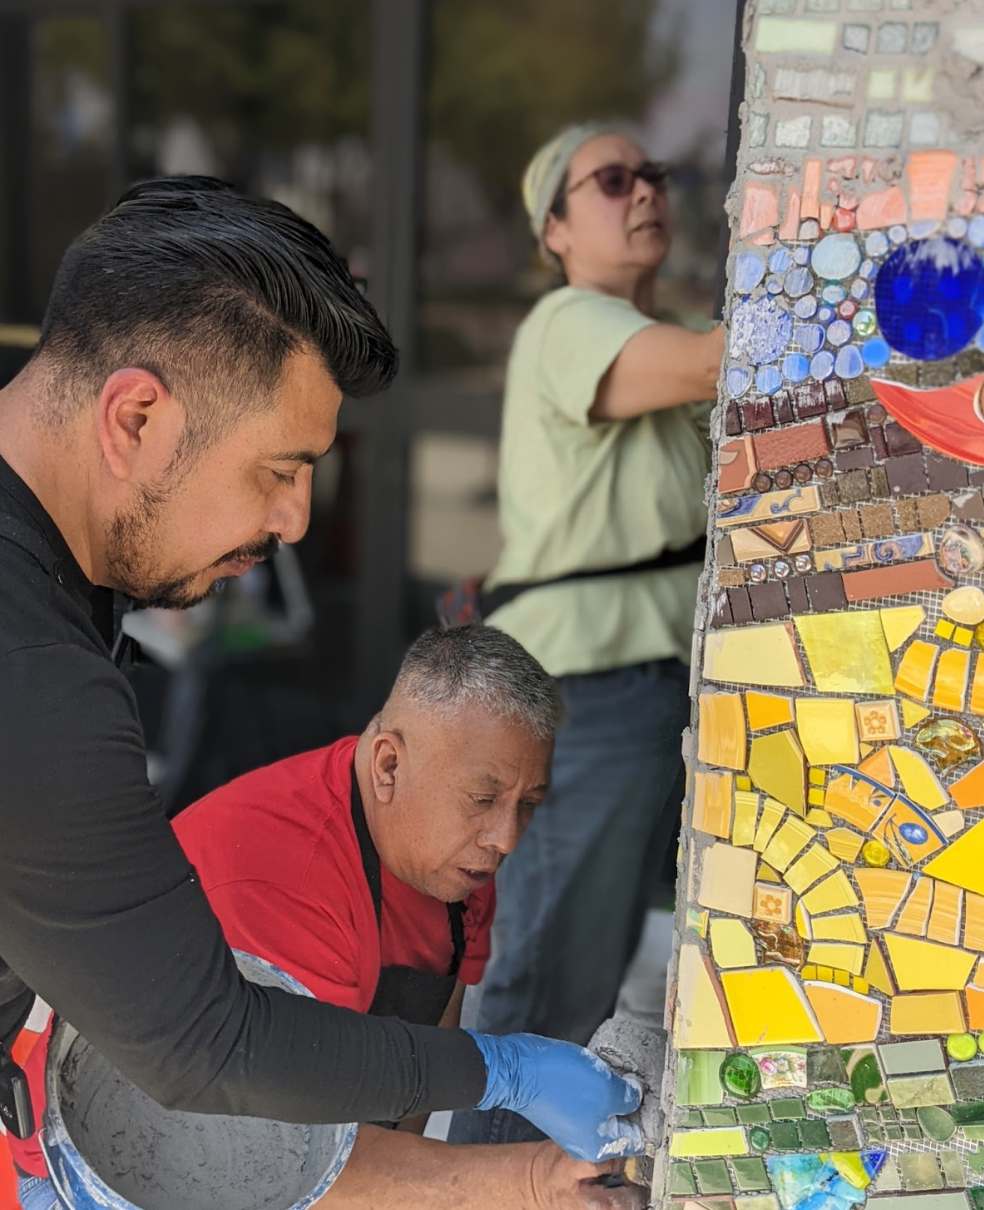 Piece by Piece artists installing the Brilliance of Community mosaic